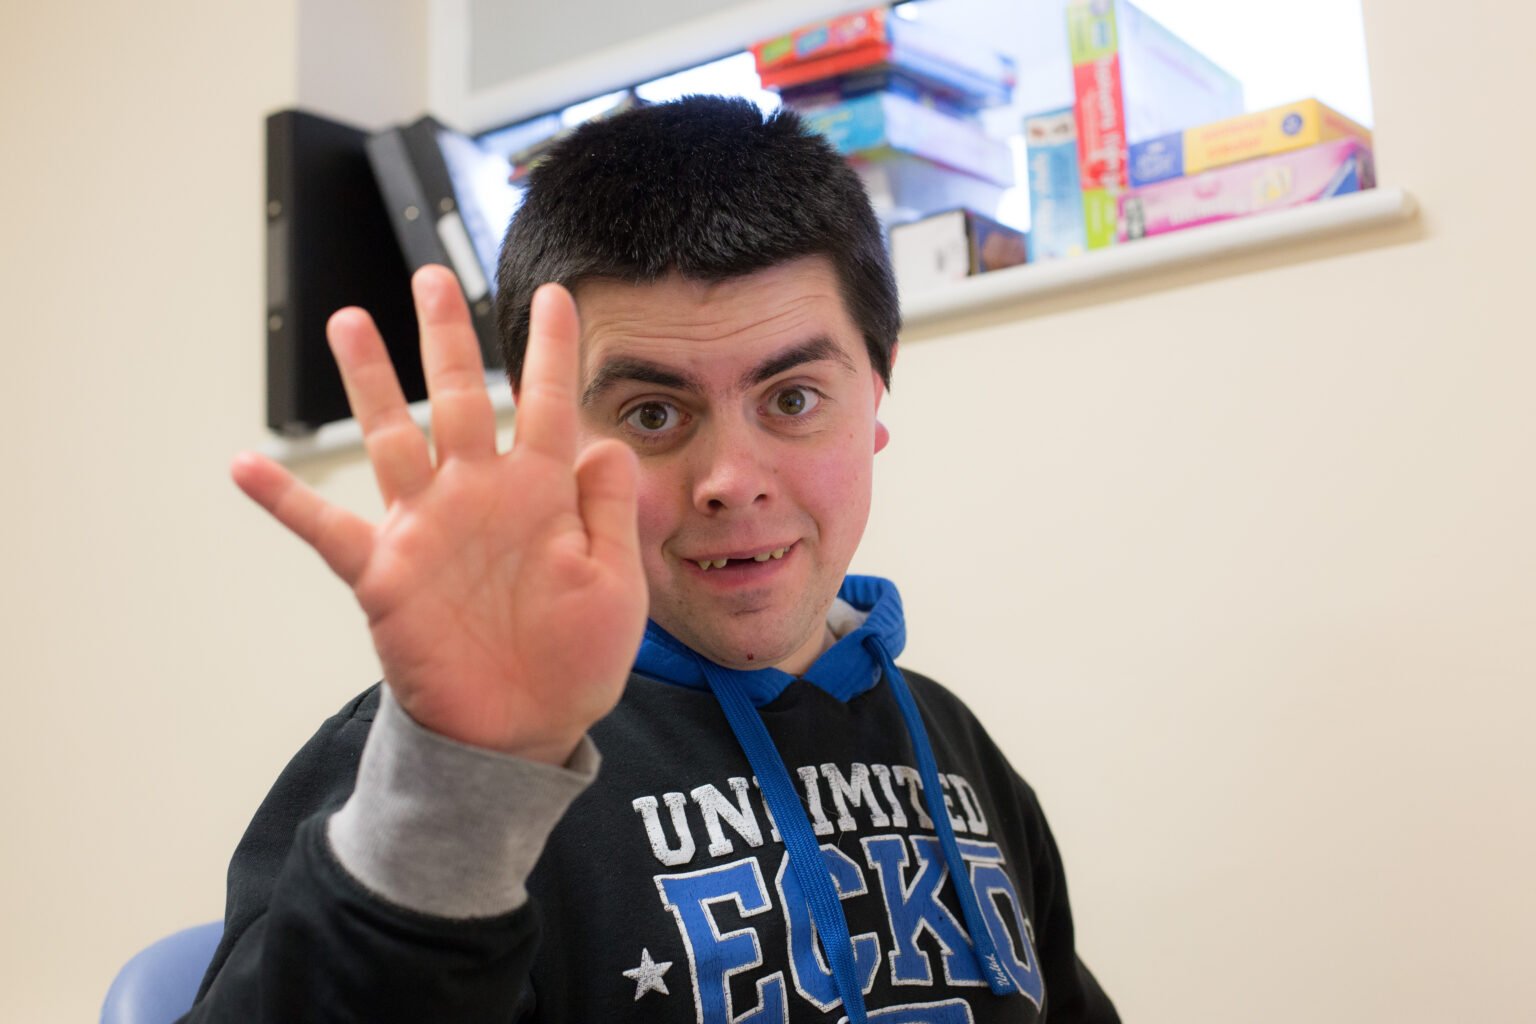 young man with down syndrome smiling and waving to the camera